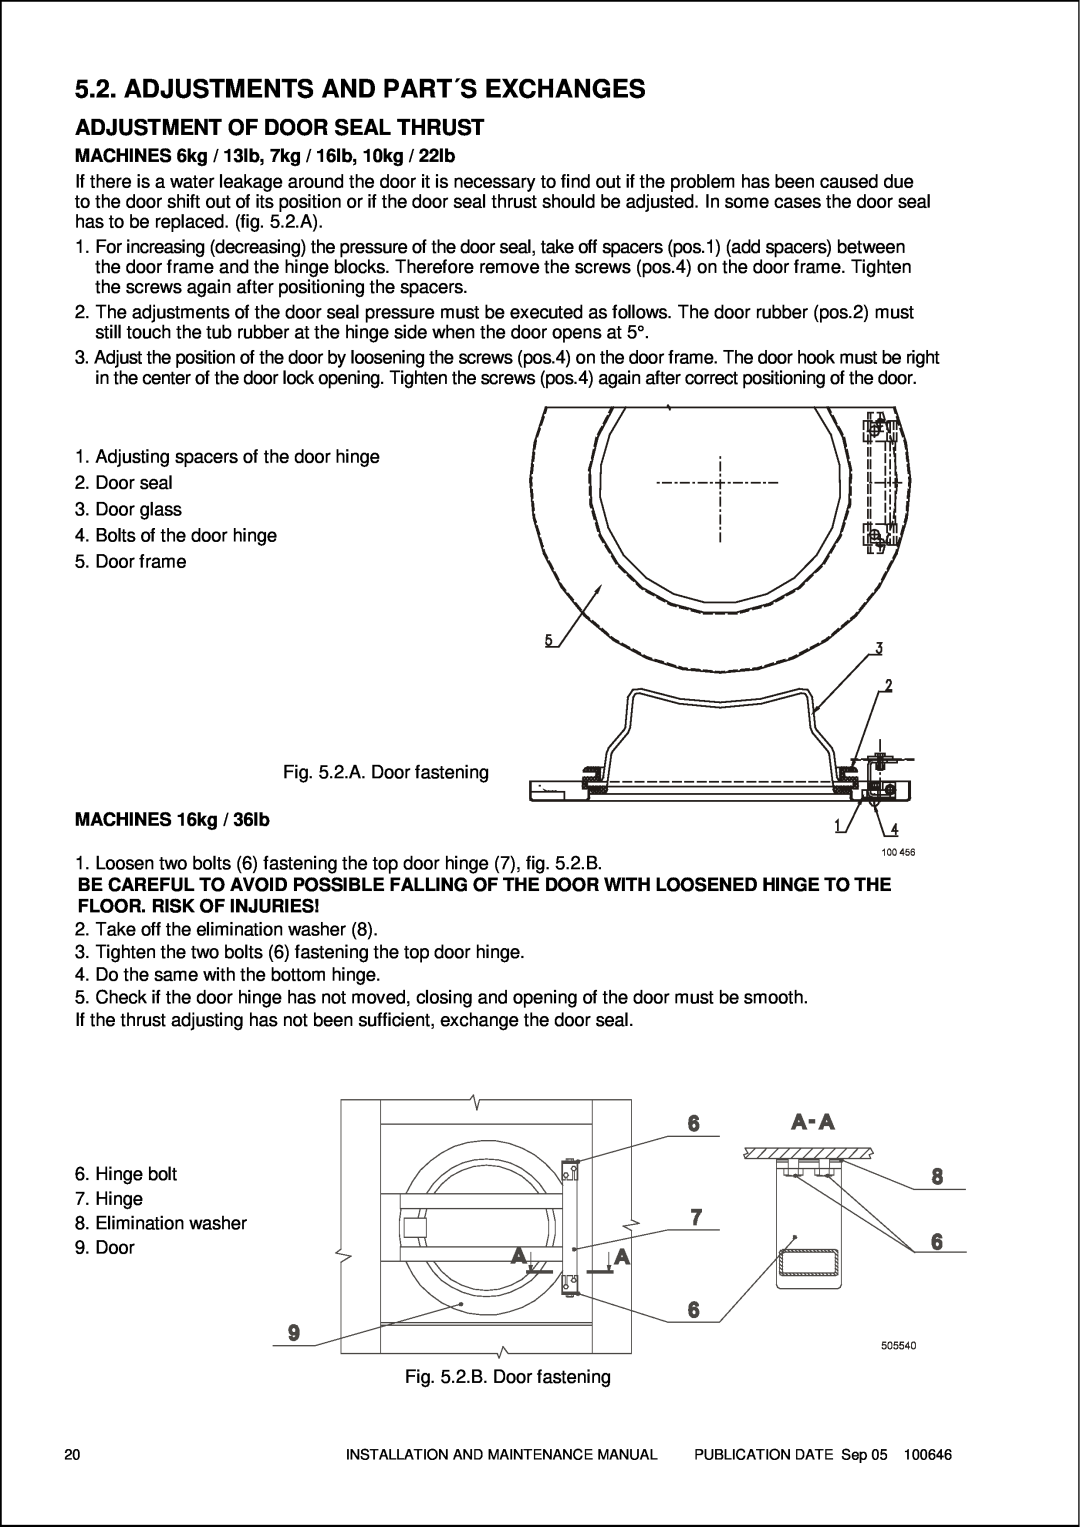 Maytag MFS 25-35 manual Adjustments And Part´S Exchanges, Adjustment Of Door Seal Thrust 